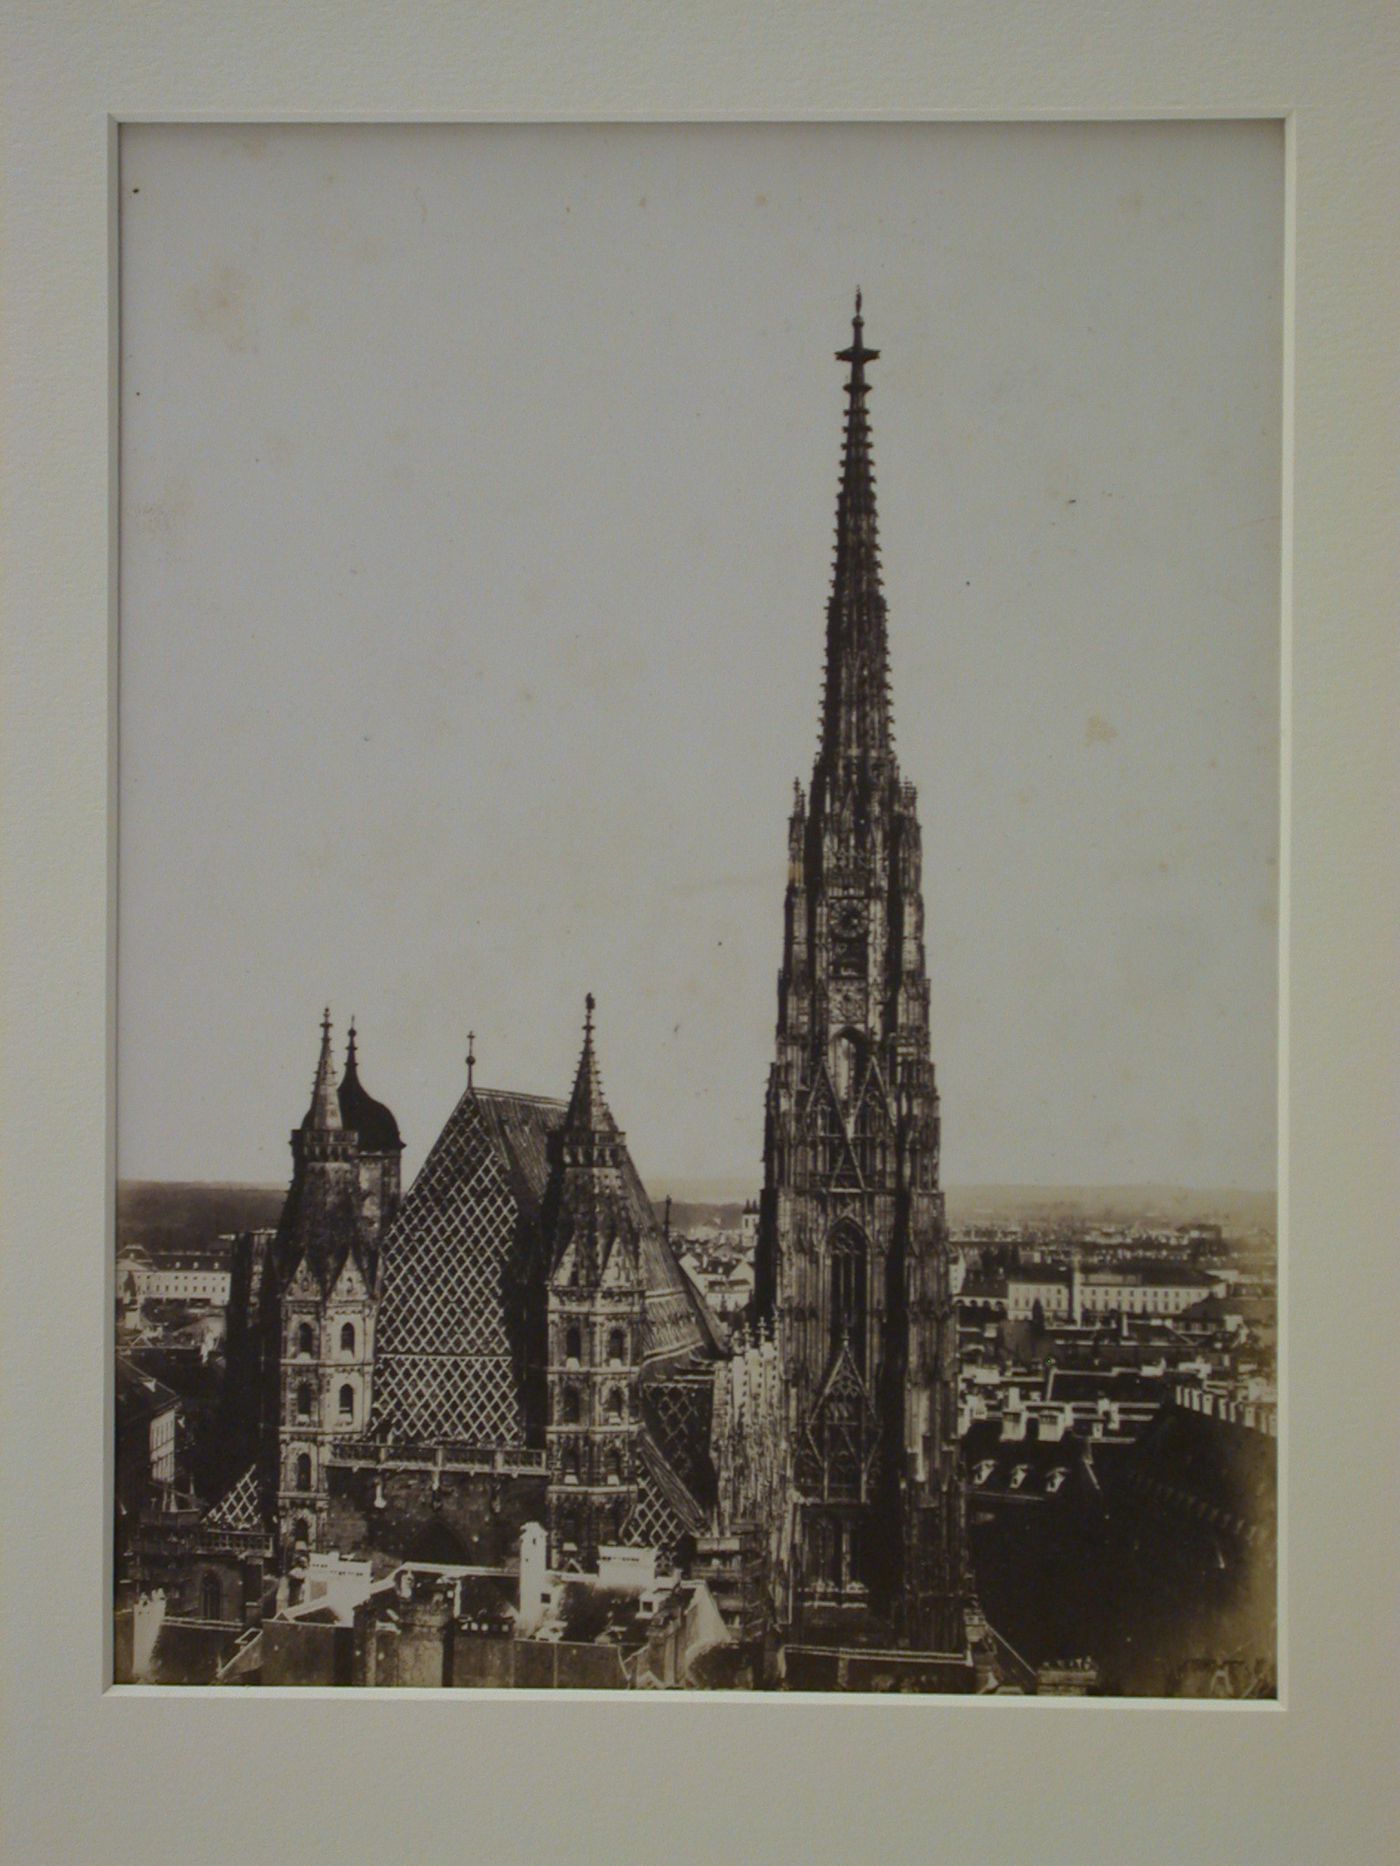 Exterior view of St. Stetarsdam from an elevated viewpoint, Vienna, Austria